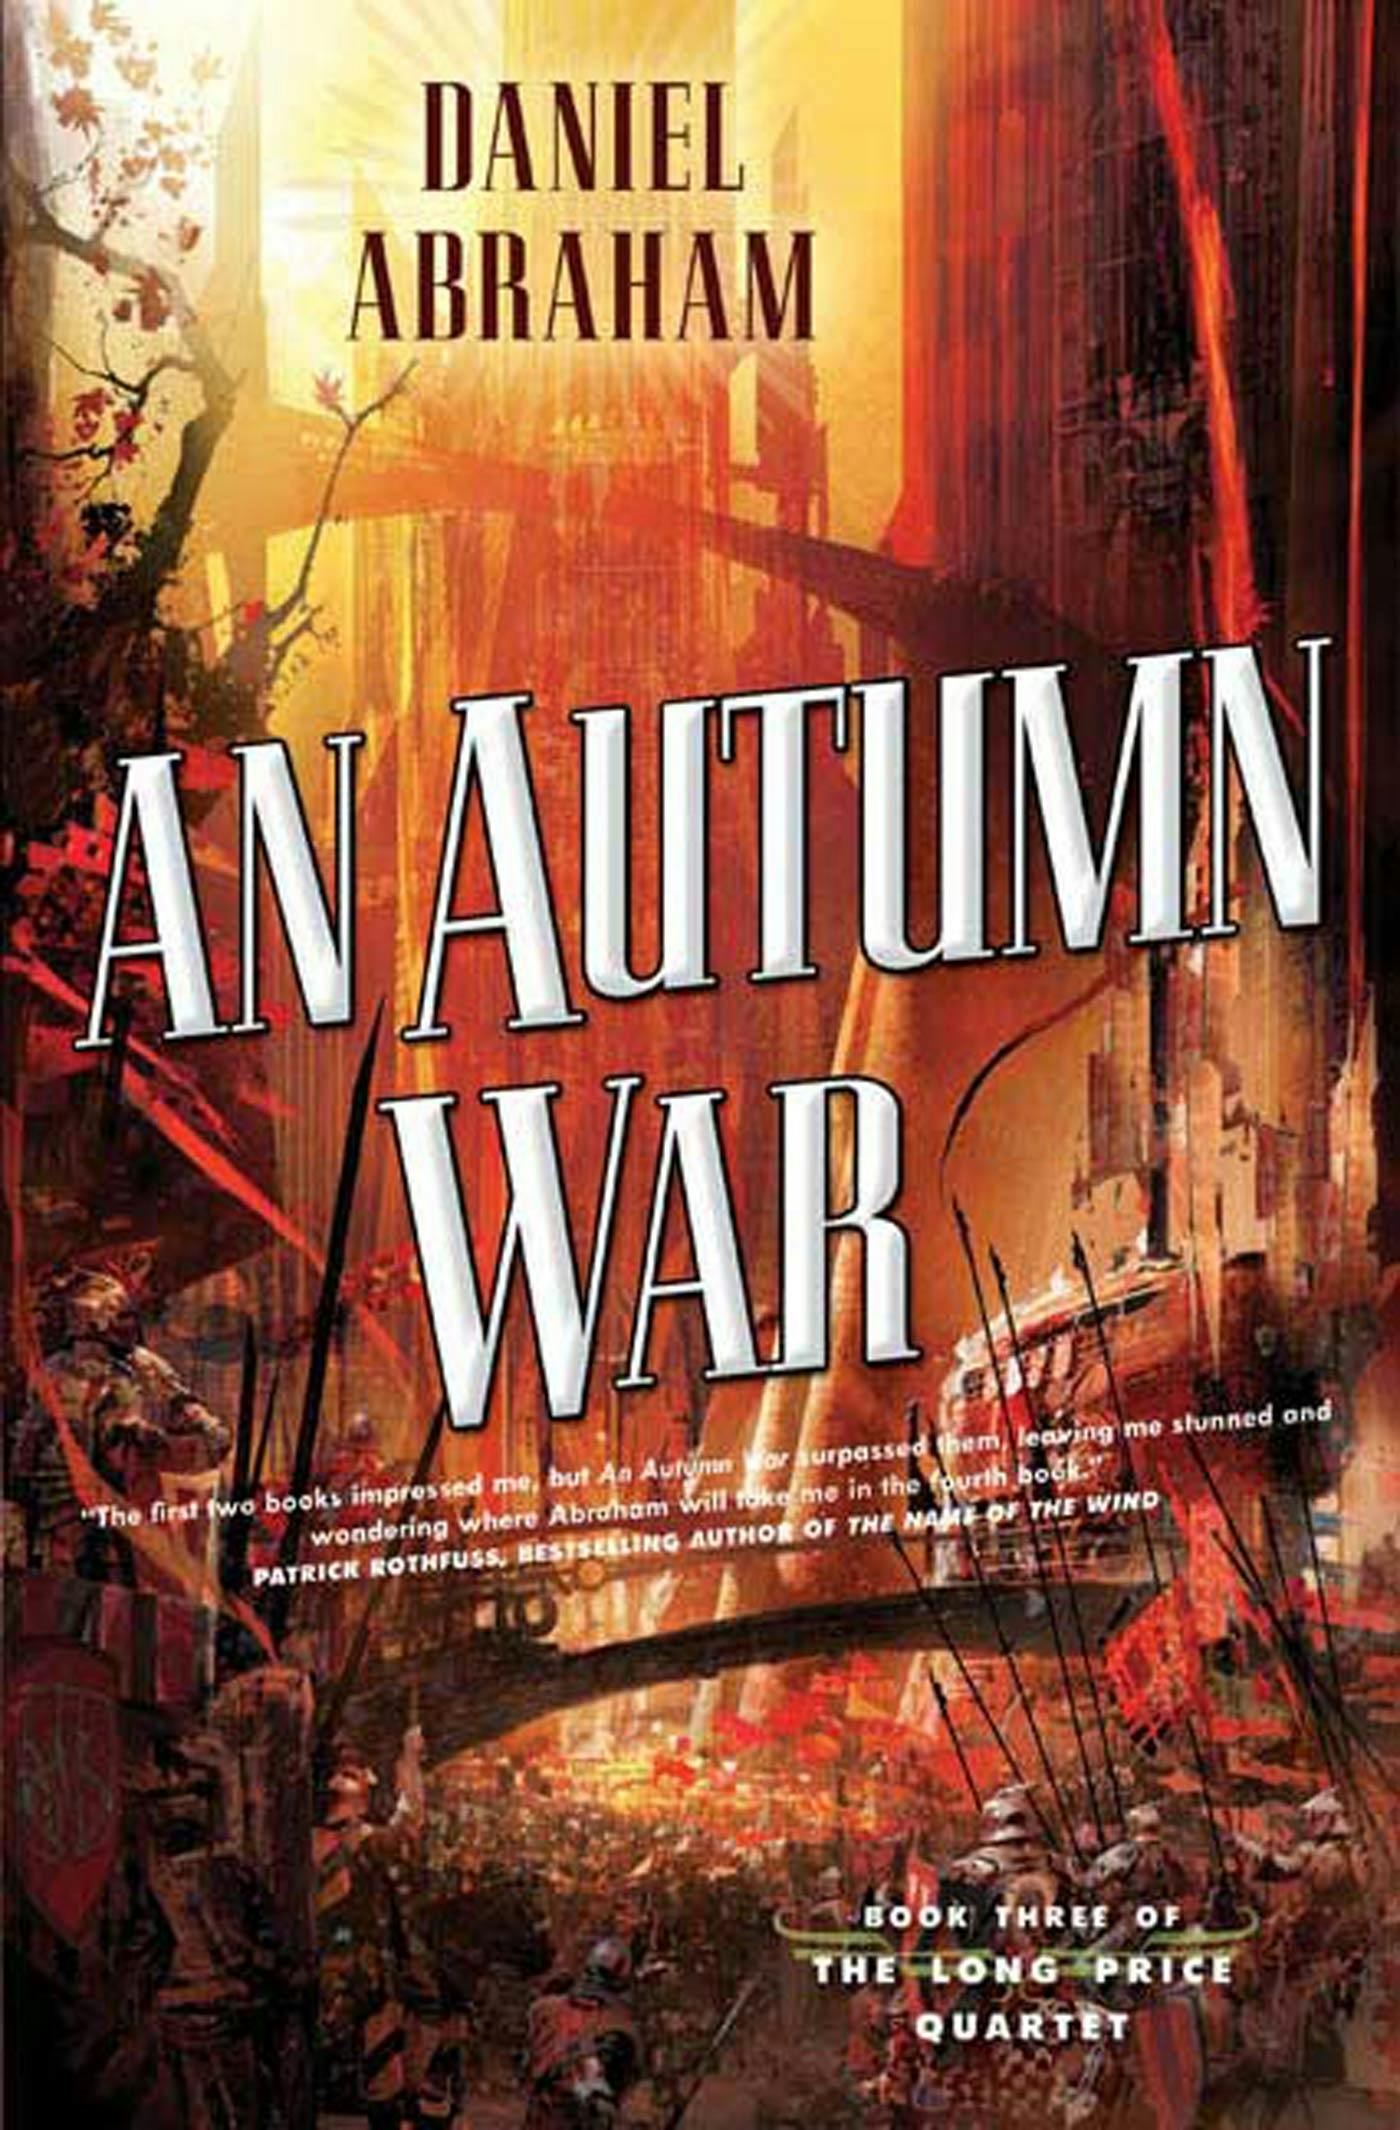 Cover for the book titled as: An Autumn War